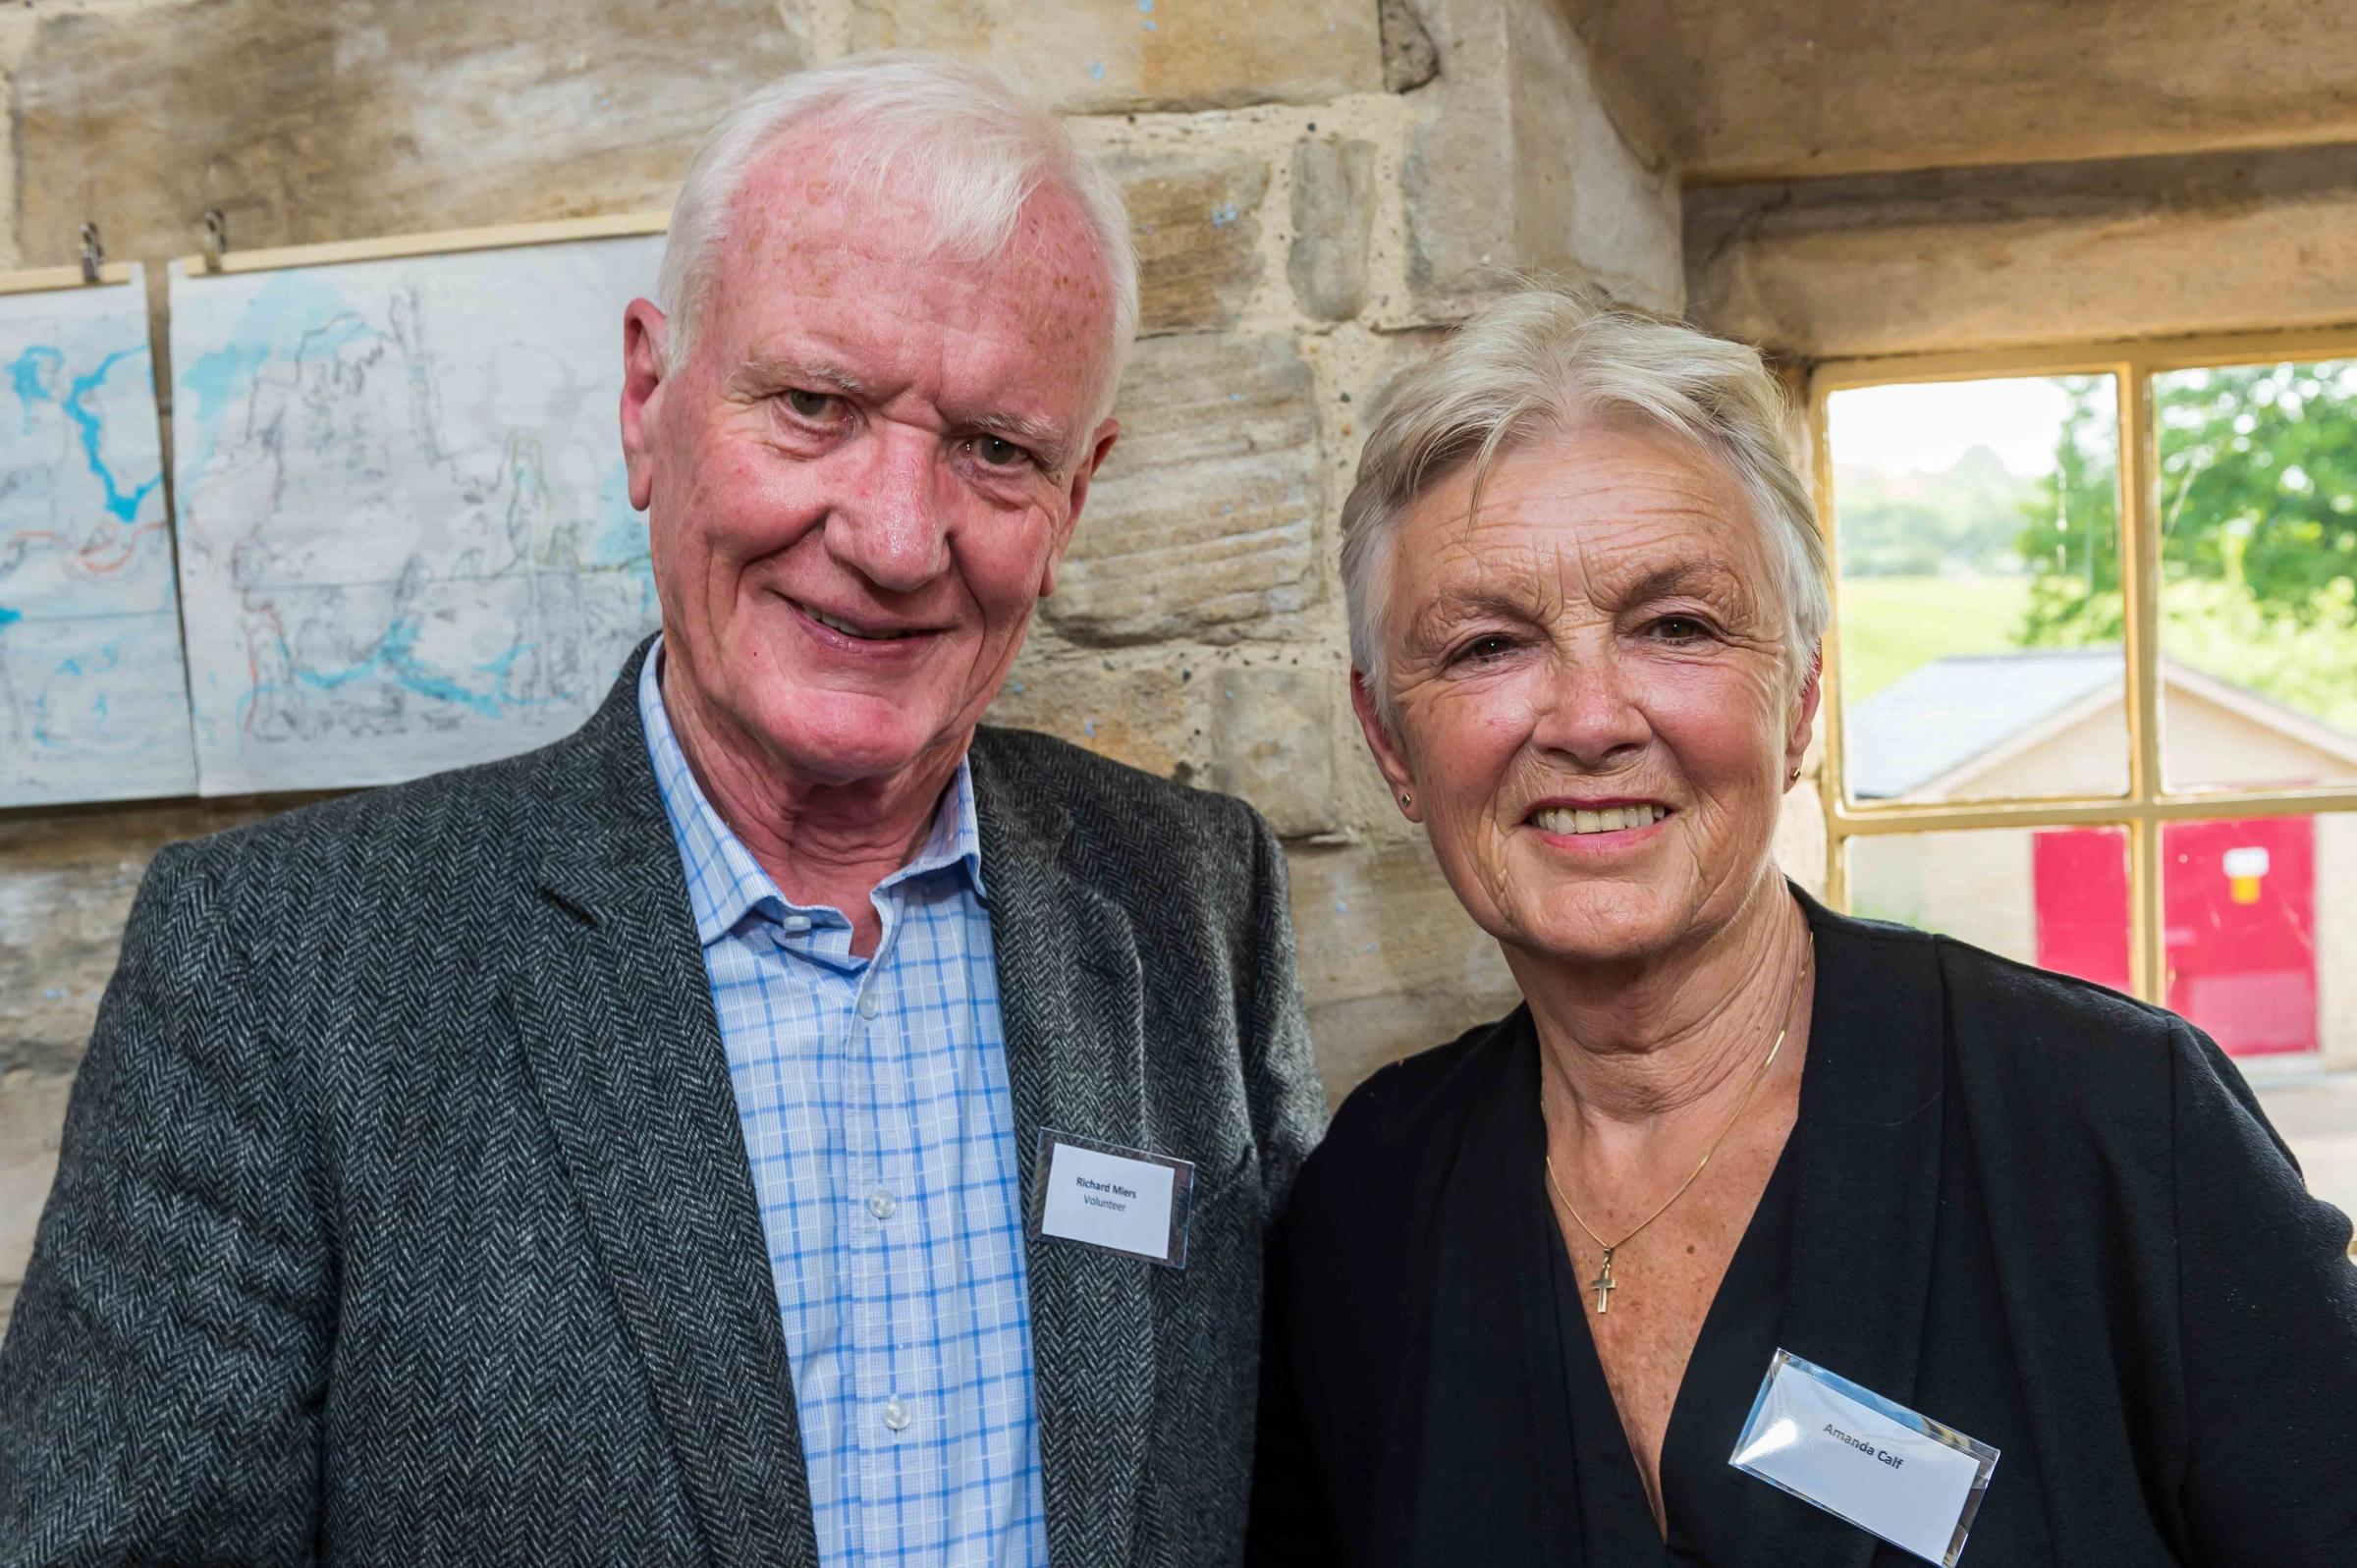 From left, Richard Miers and Amanda Calf at Swaledale Festival Chairmans Reception Picture: Gray Walker - Scenicview Gallery & Studio 